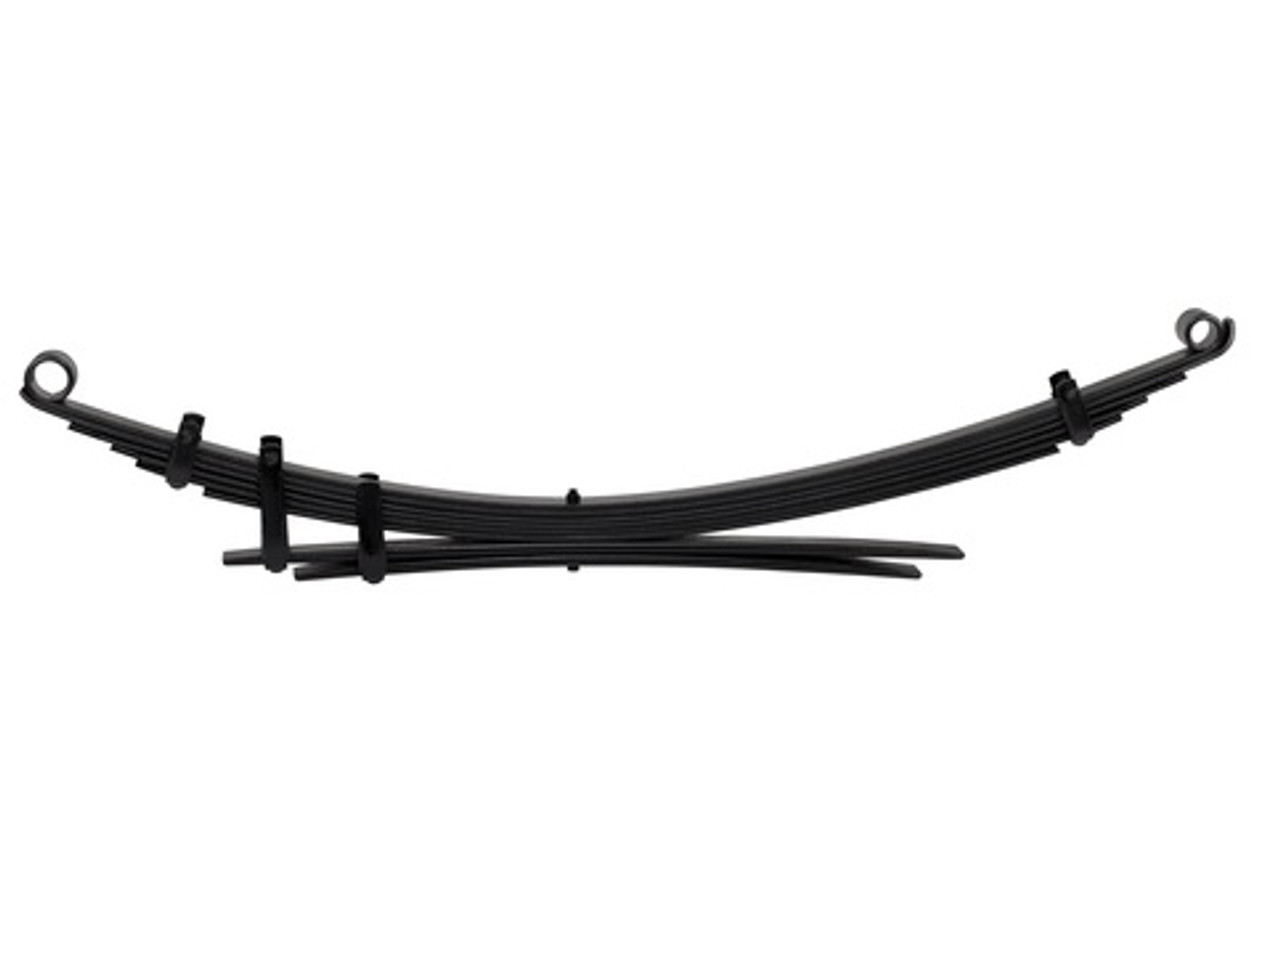 Front Near Side Leaf Spring (2" Lift) - Medium Load (0-110LBS) Suited For 1979-11/1997 Toyota Hilux/Pickup